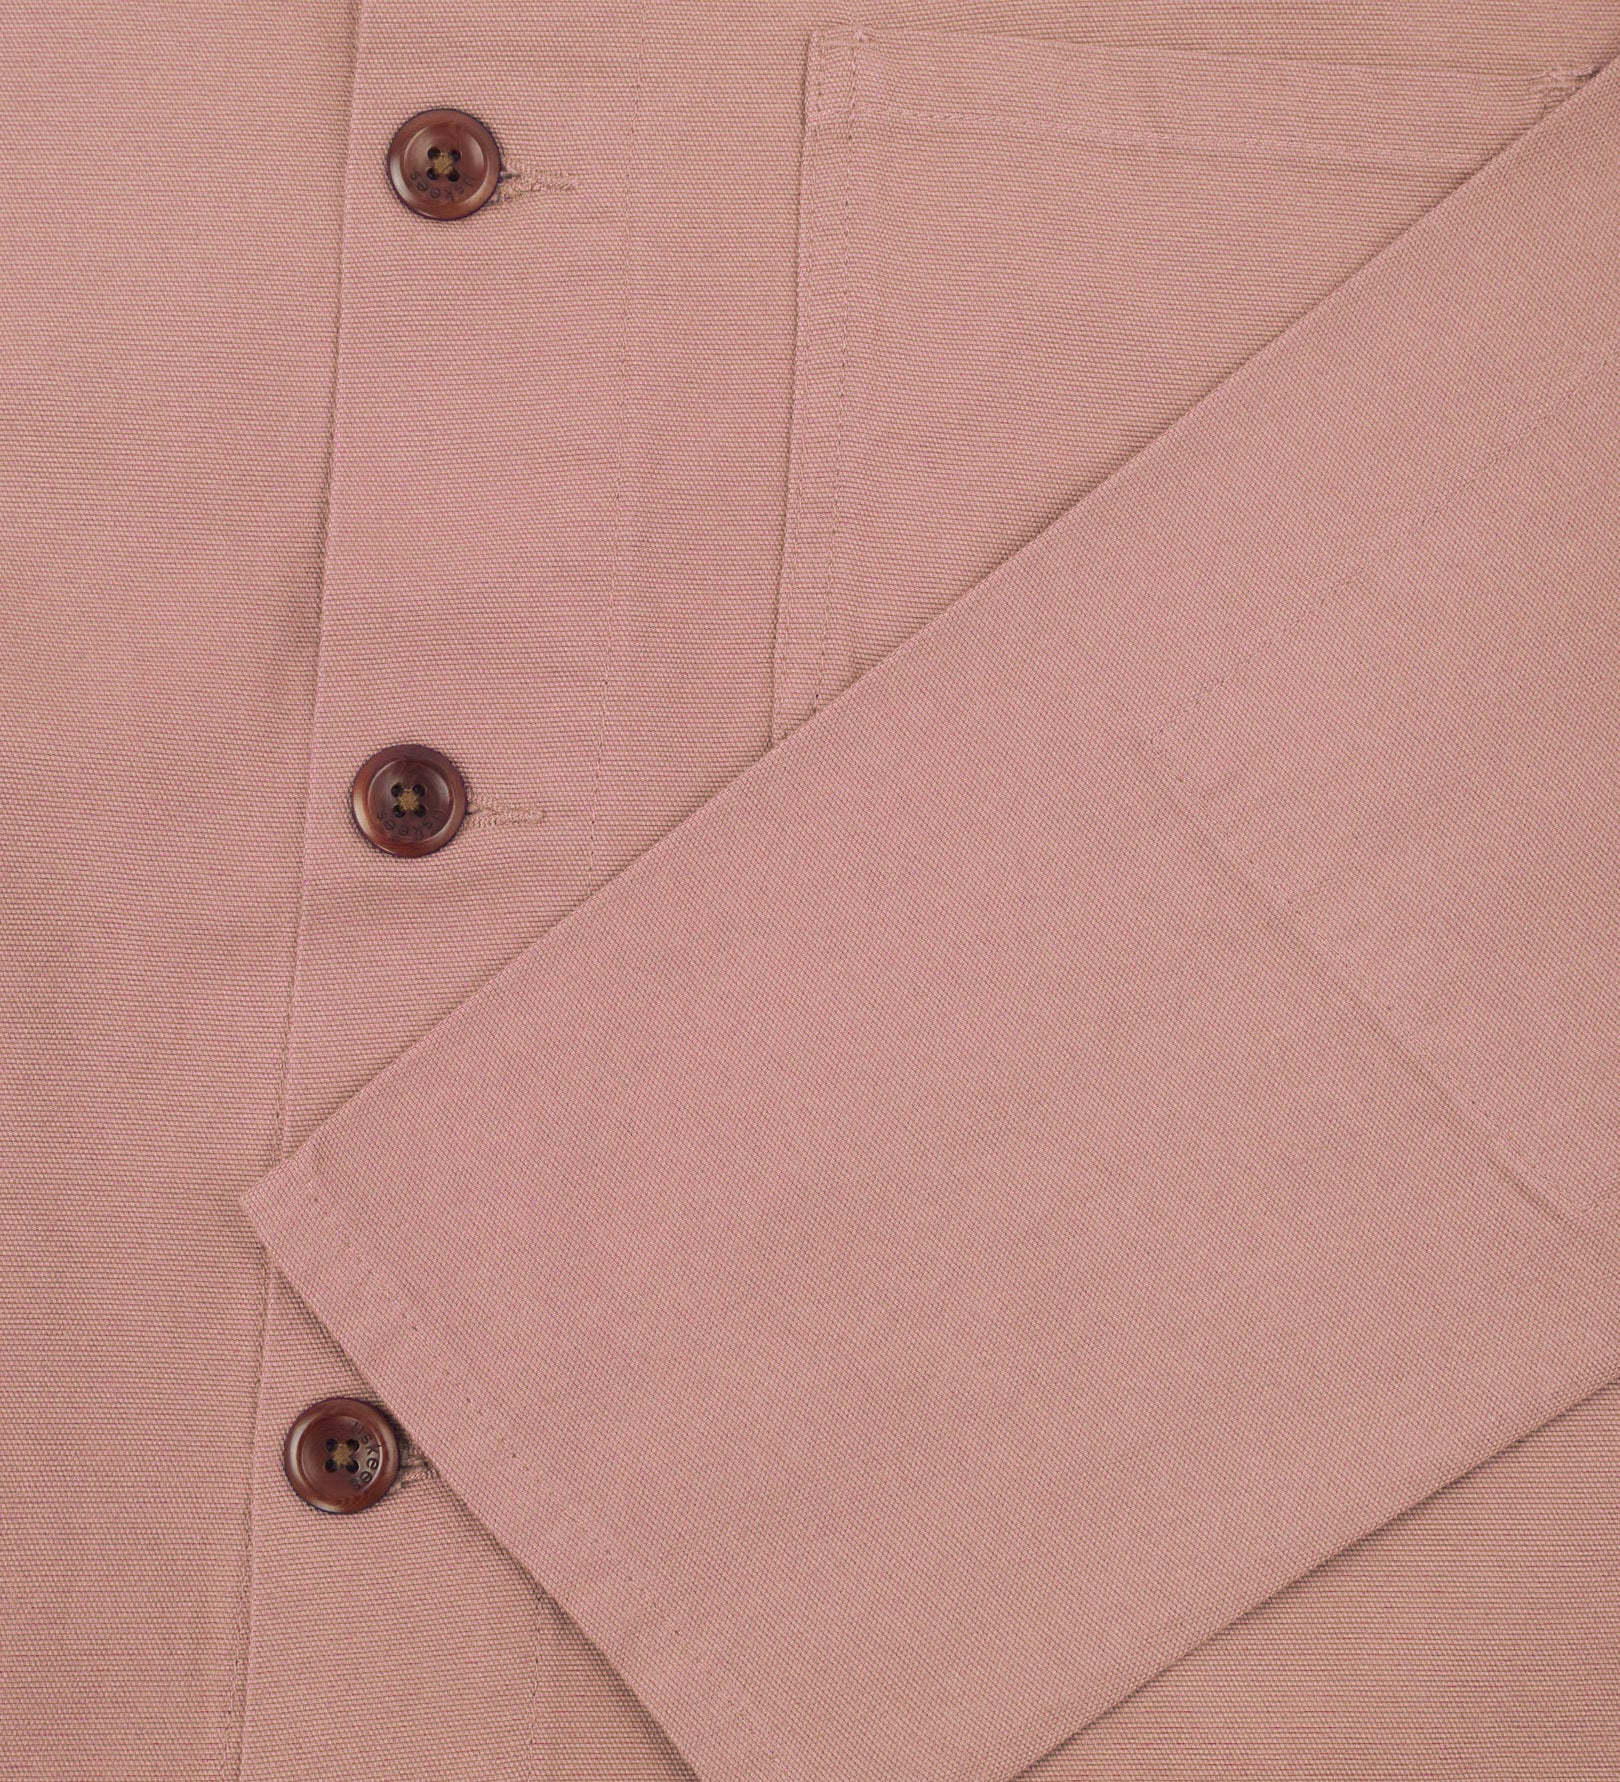 Closer view of mid section of dusty pink, buttoned organic cotton overshirt from Uskees. Focus on cuff, pockets and corozo buttons.